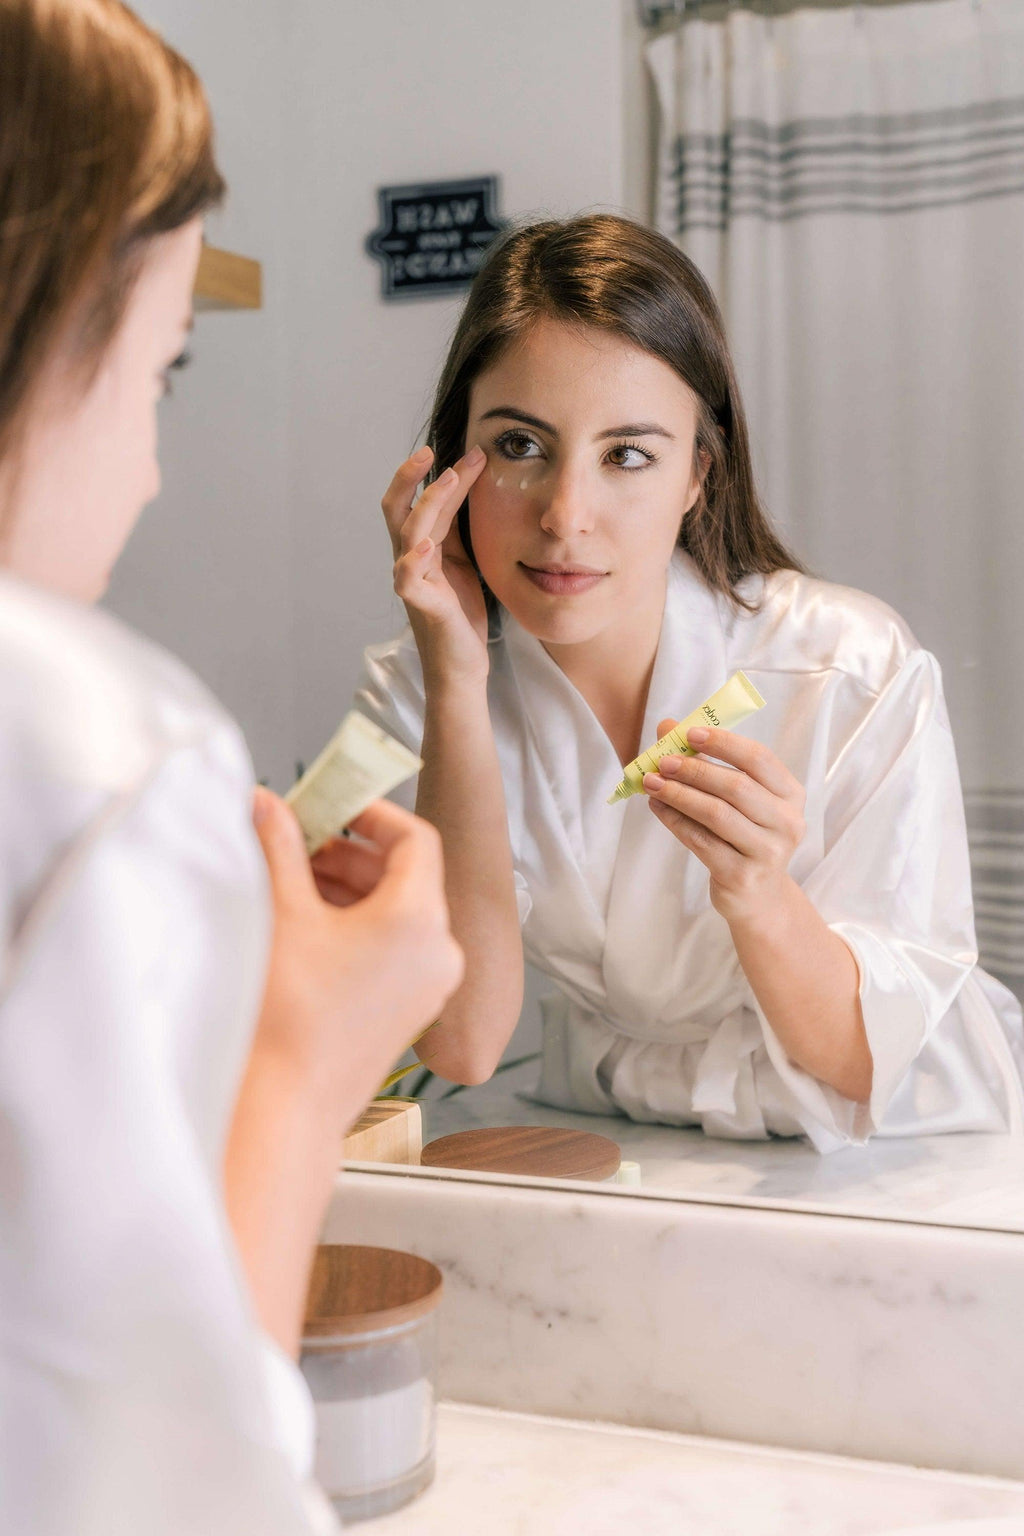 Image of a female model applying Bia Eye Cream to her eyes in a mirror